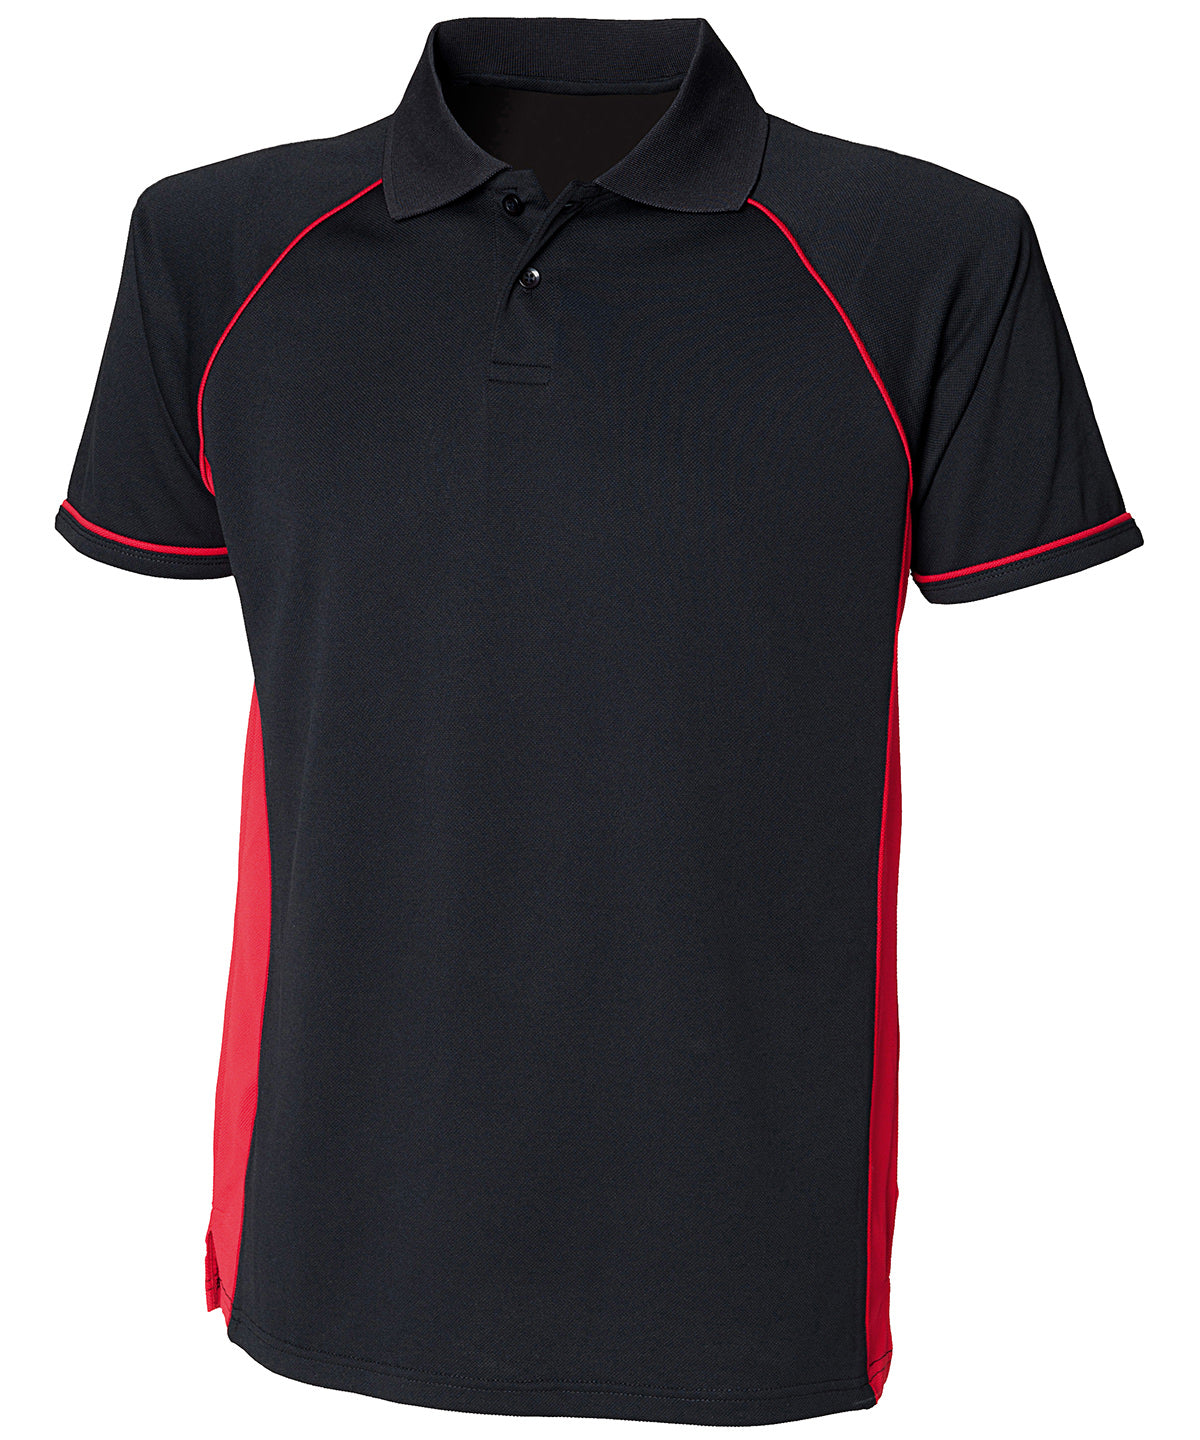 Personalised Polo Shirts - Black Finden & Hales Panel performance polo